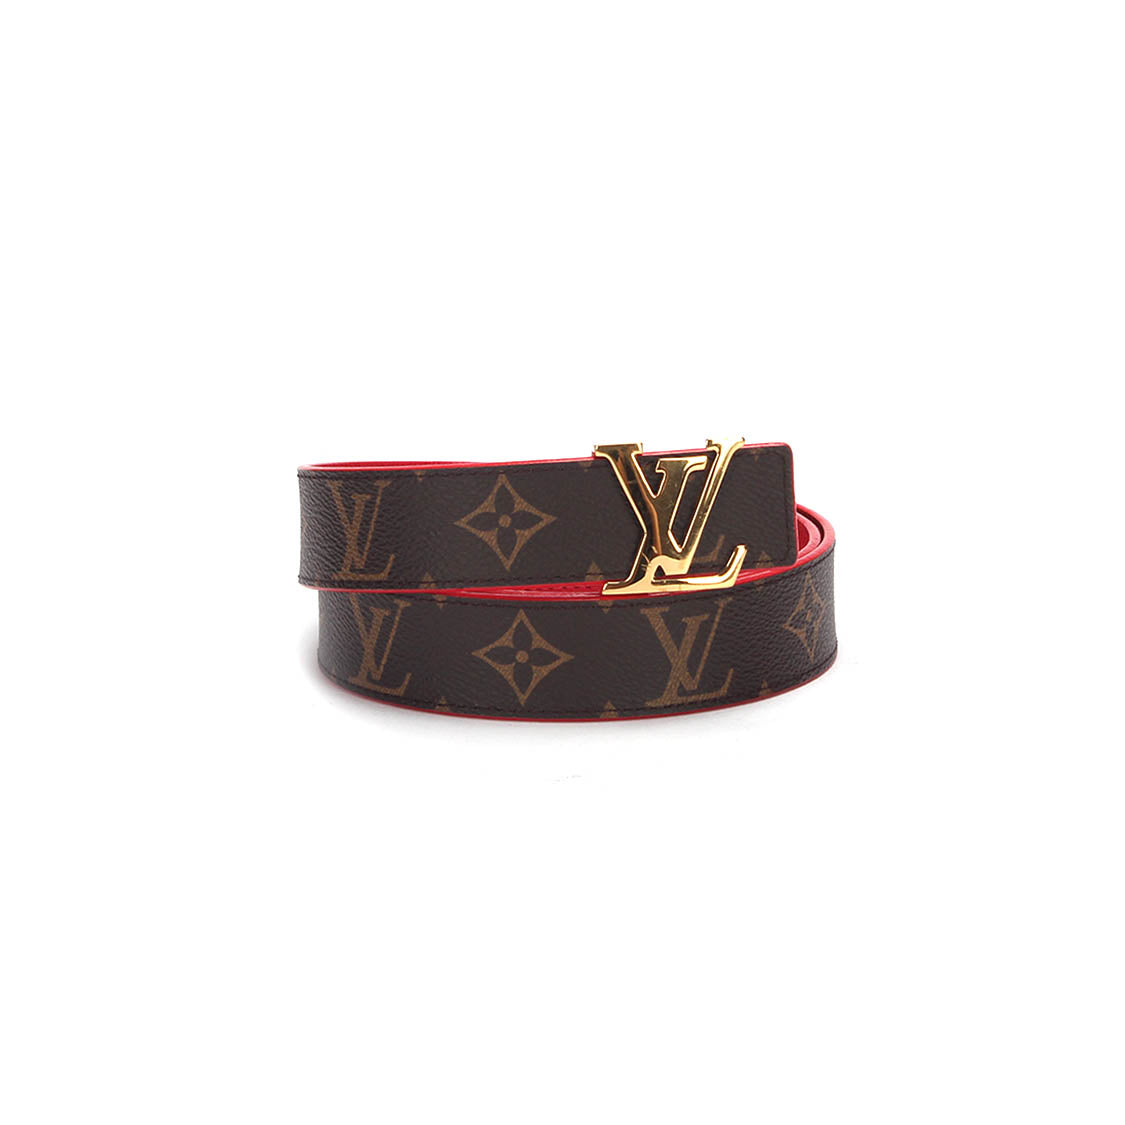 Louis Vuitton reversible red belt with gold circle buckle.